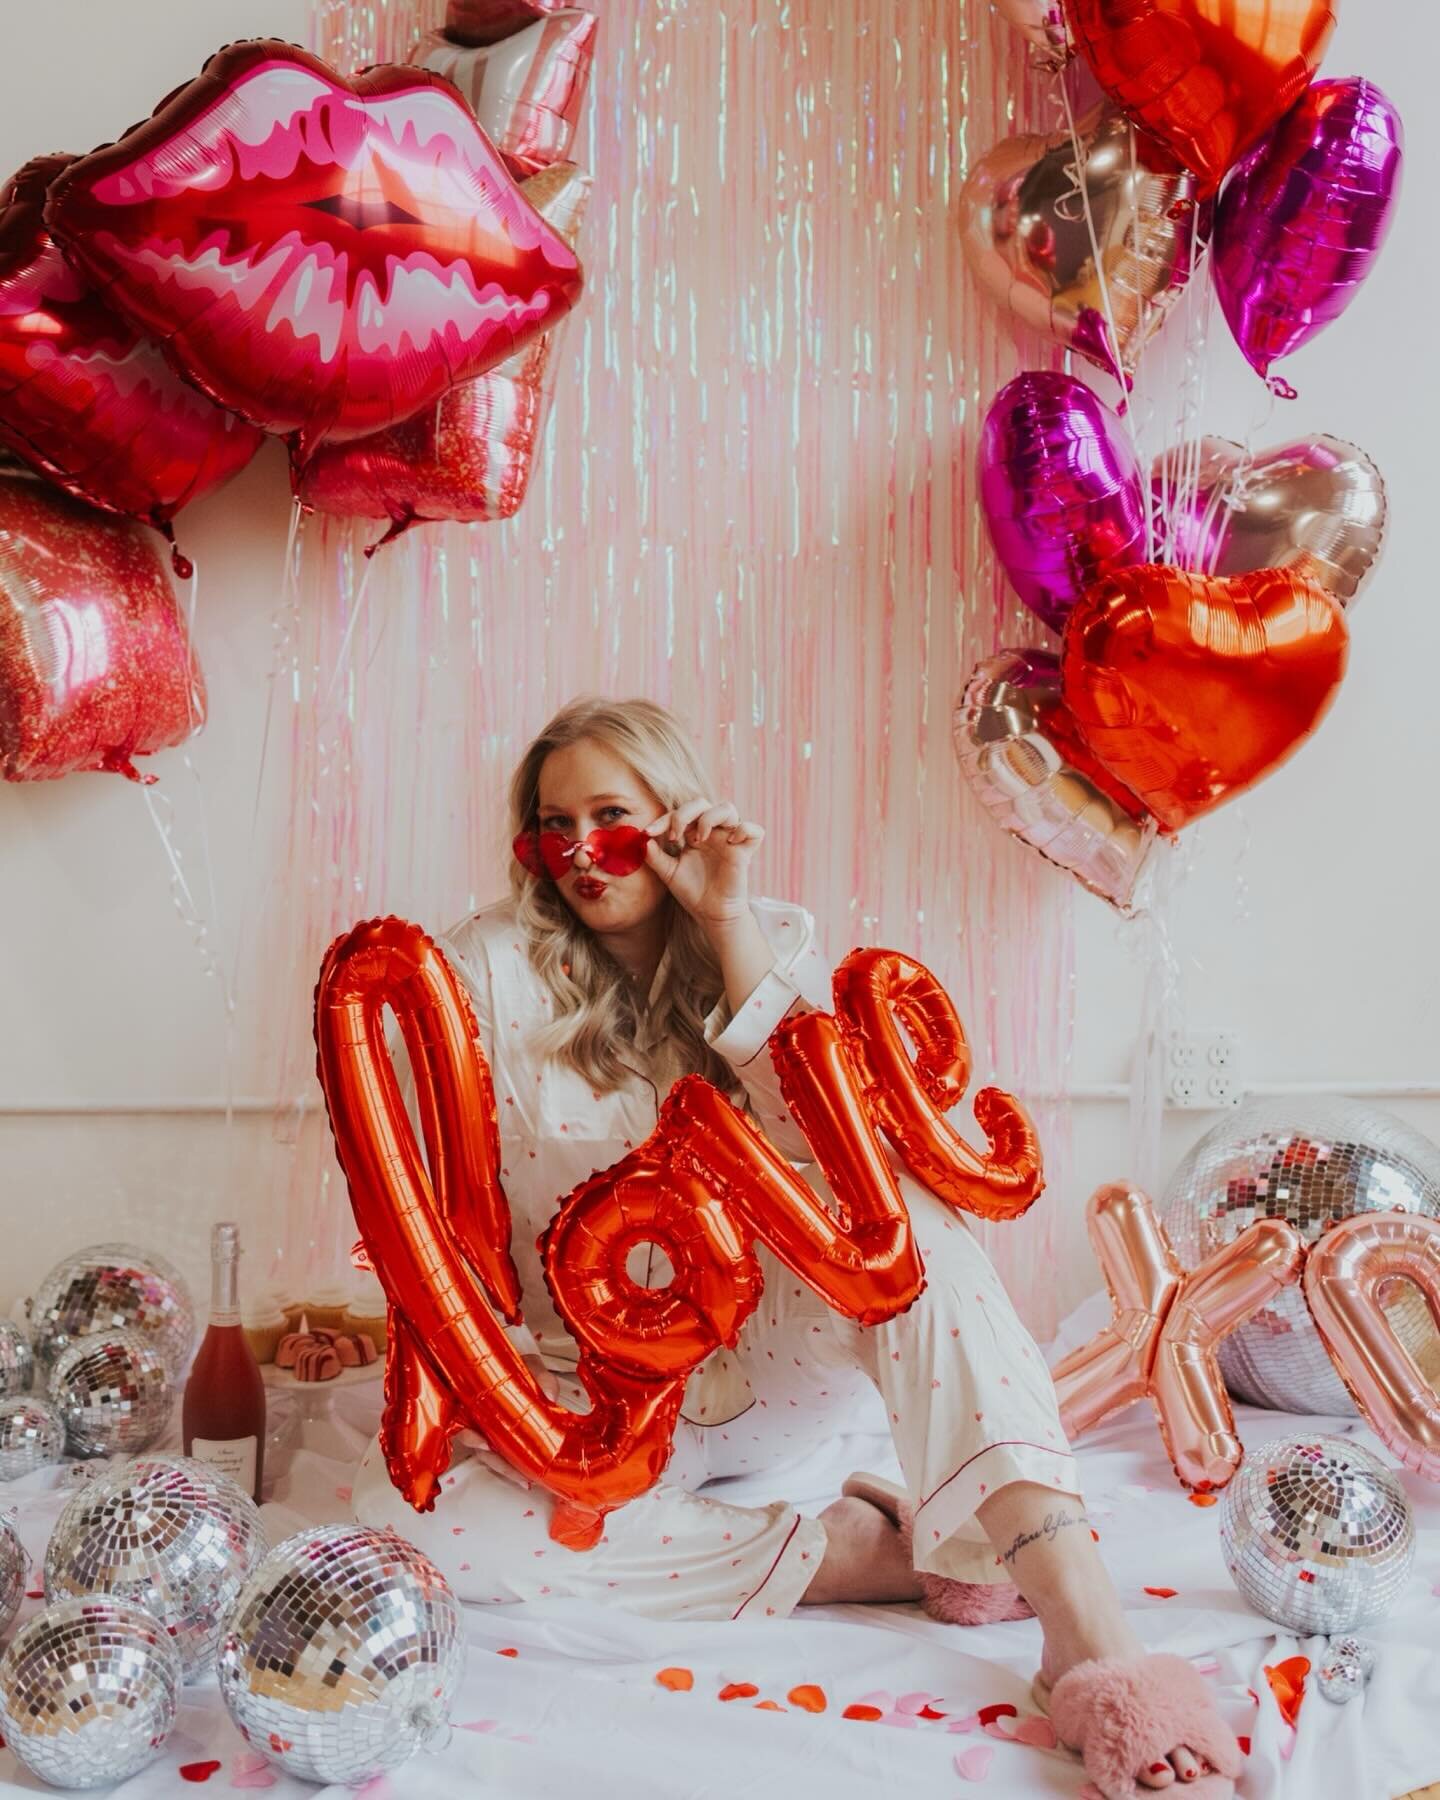 xoxo 💋 

happy valentines day my loves!! 

hope everyone has an amazing day spoiled in love with your fav human or spoiled by yourself 🥰 
.
.
.
📷 | photo by @karjophoto &mdash; edited by me, myself, + i